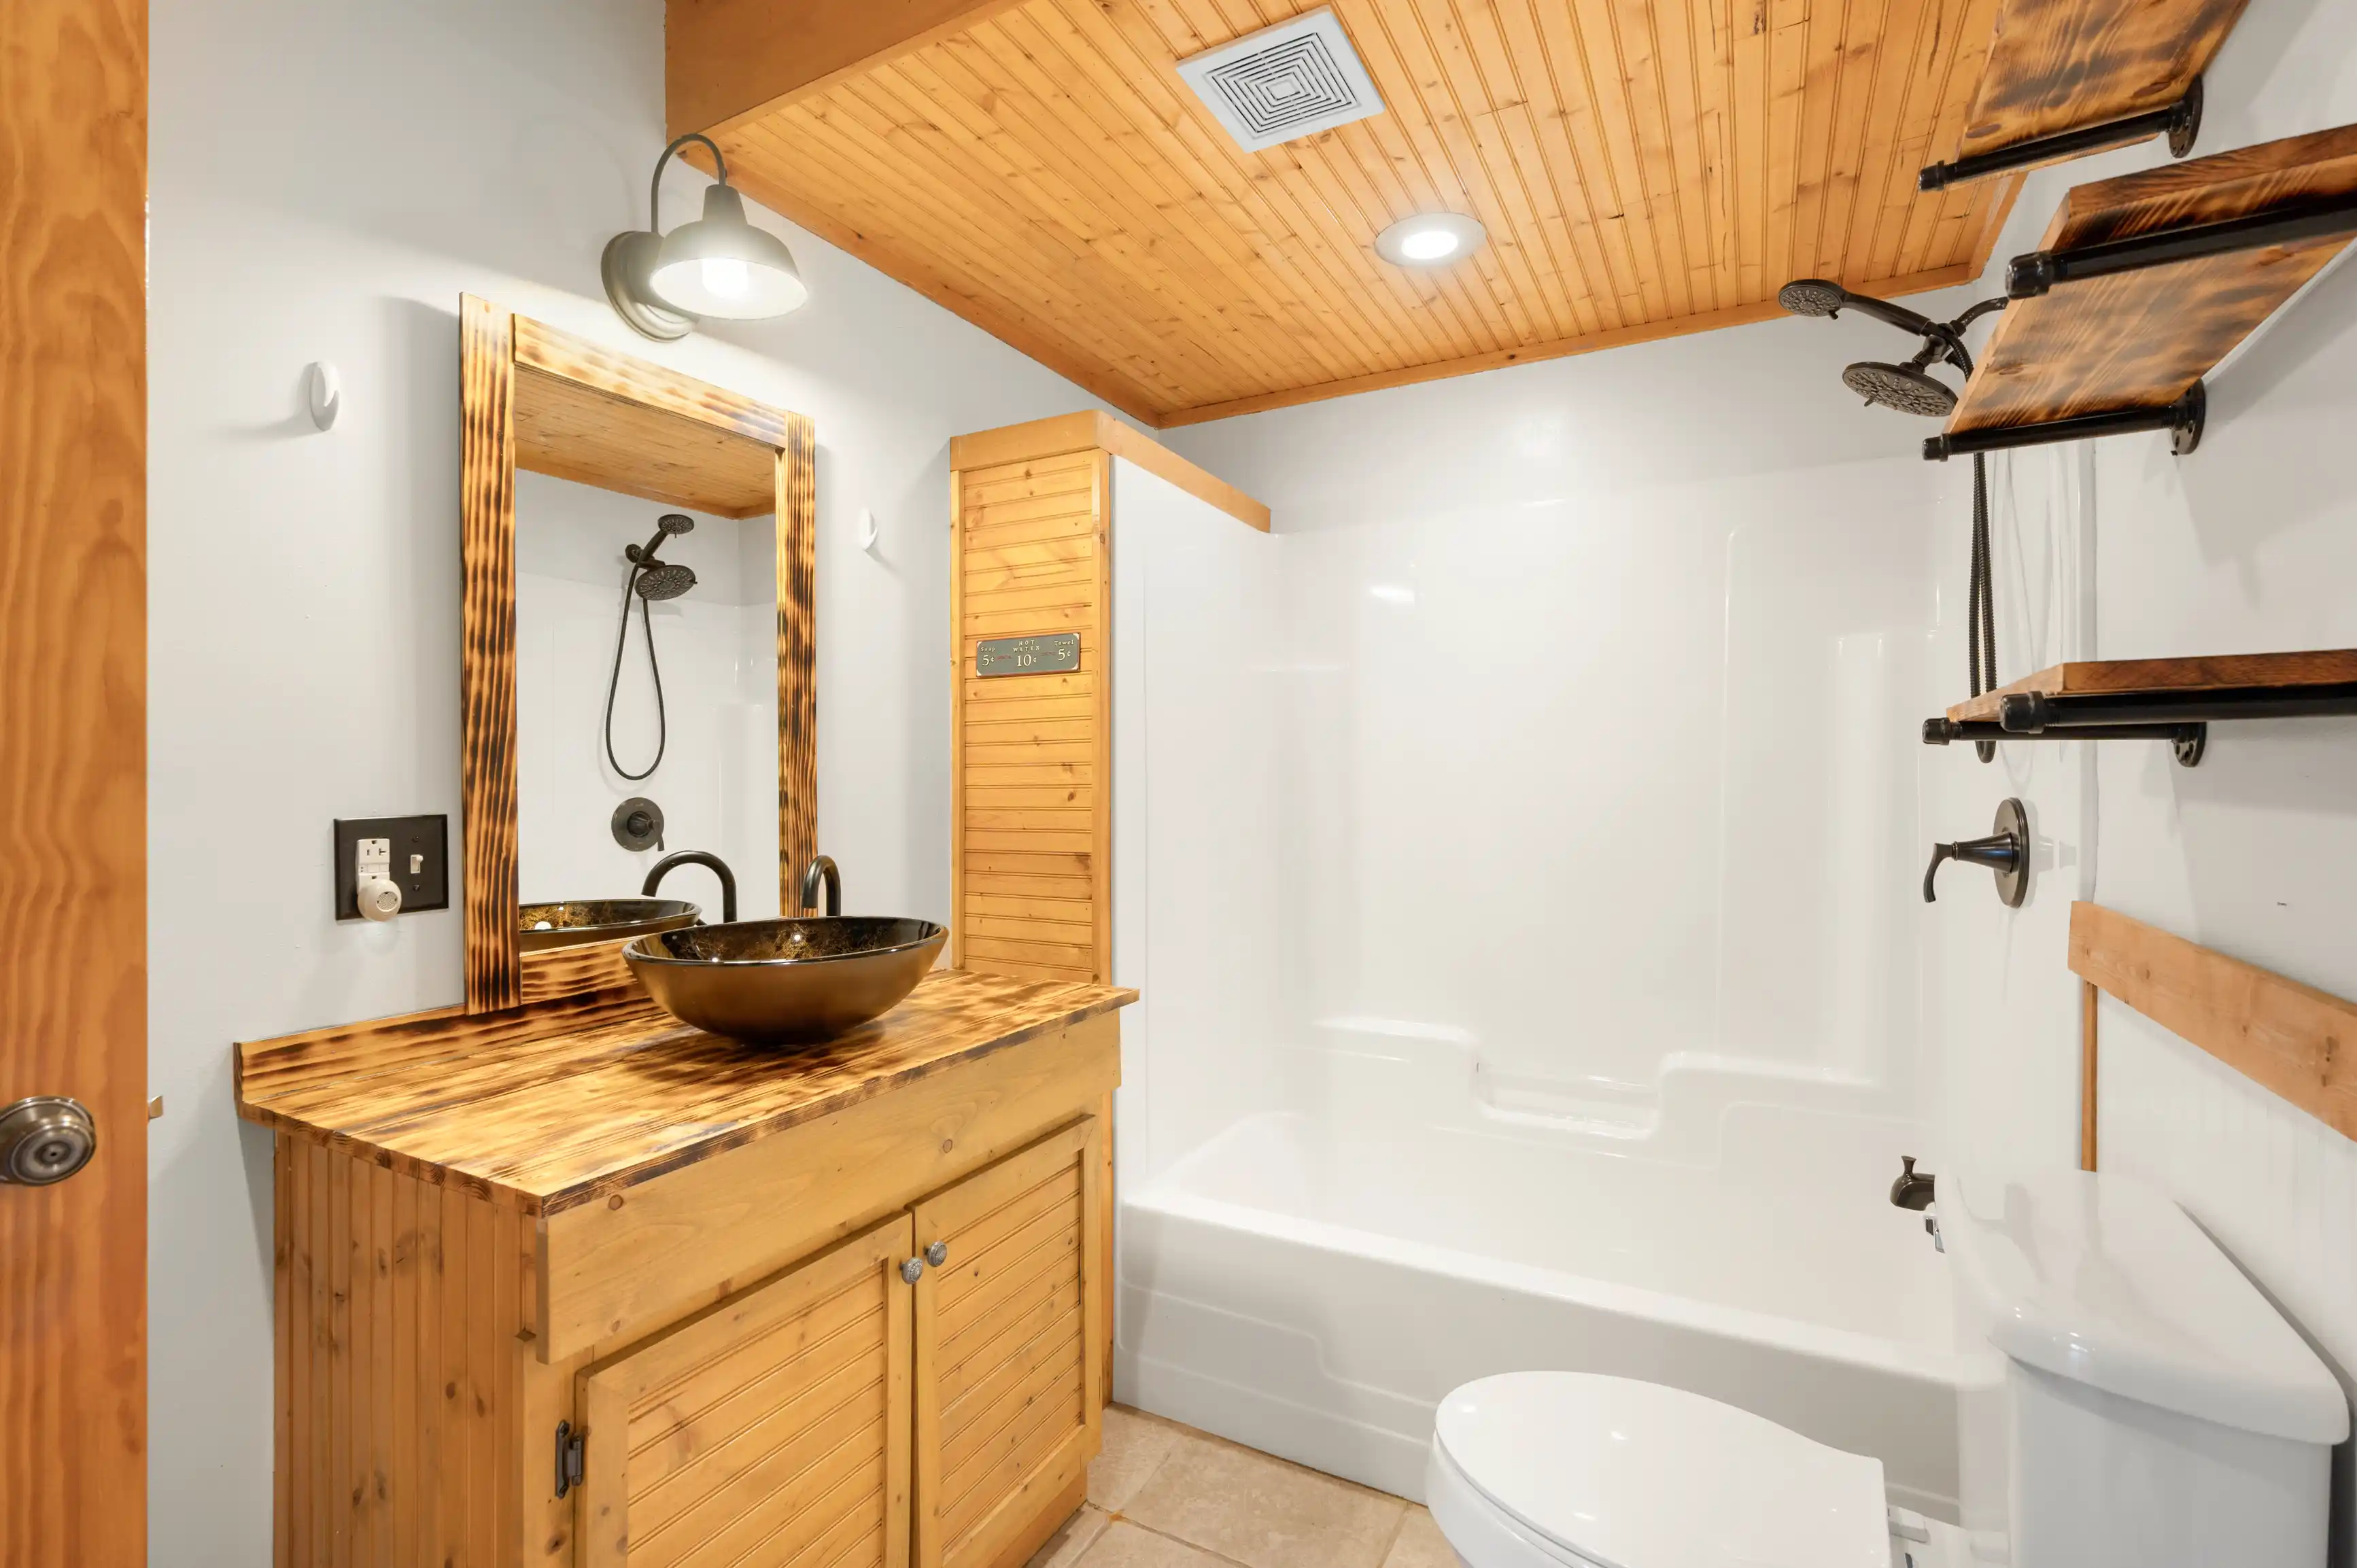 A well-lit modern bathroom with wood accents featuring a bowl sink on a wooden vanity, a large mirror, a bathtub with shower, a toilet, and a wooden sauna cabin.